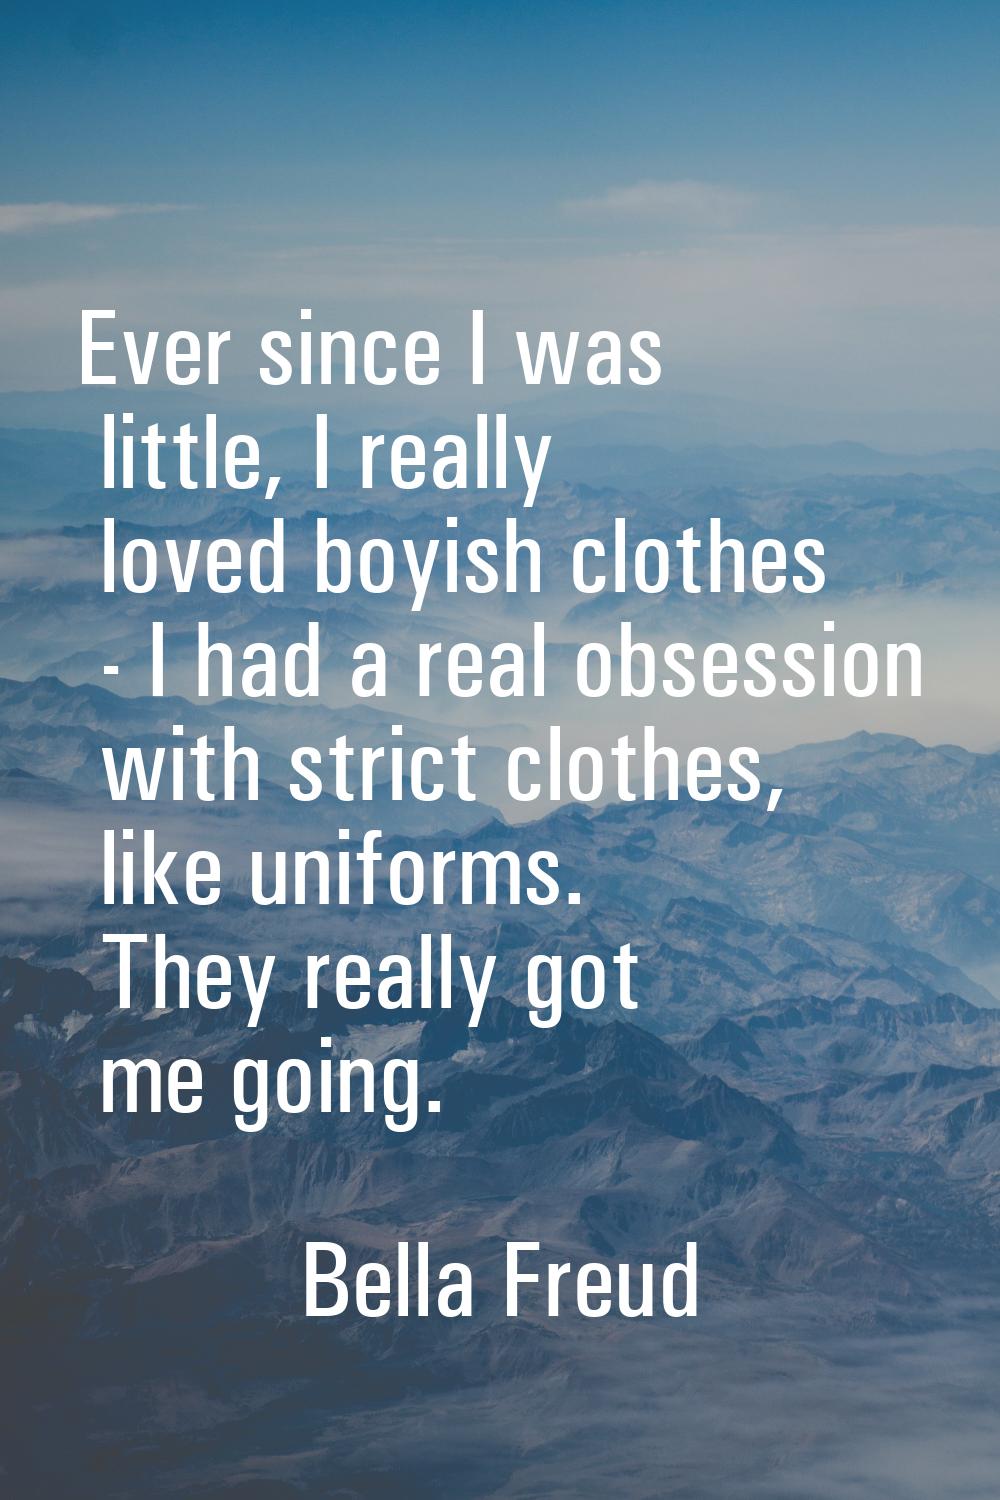 Ever since I was little, I really loved boyish clothes - I had a real obsession with strict clothes